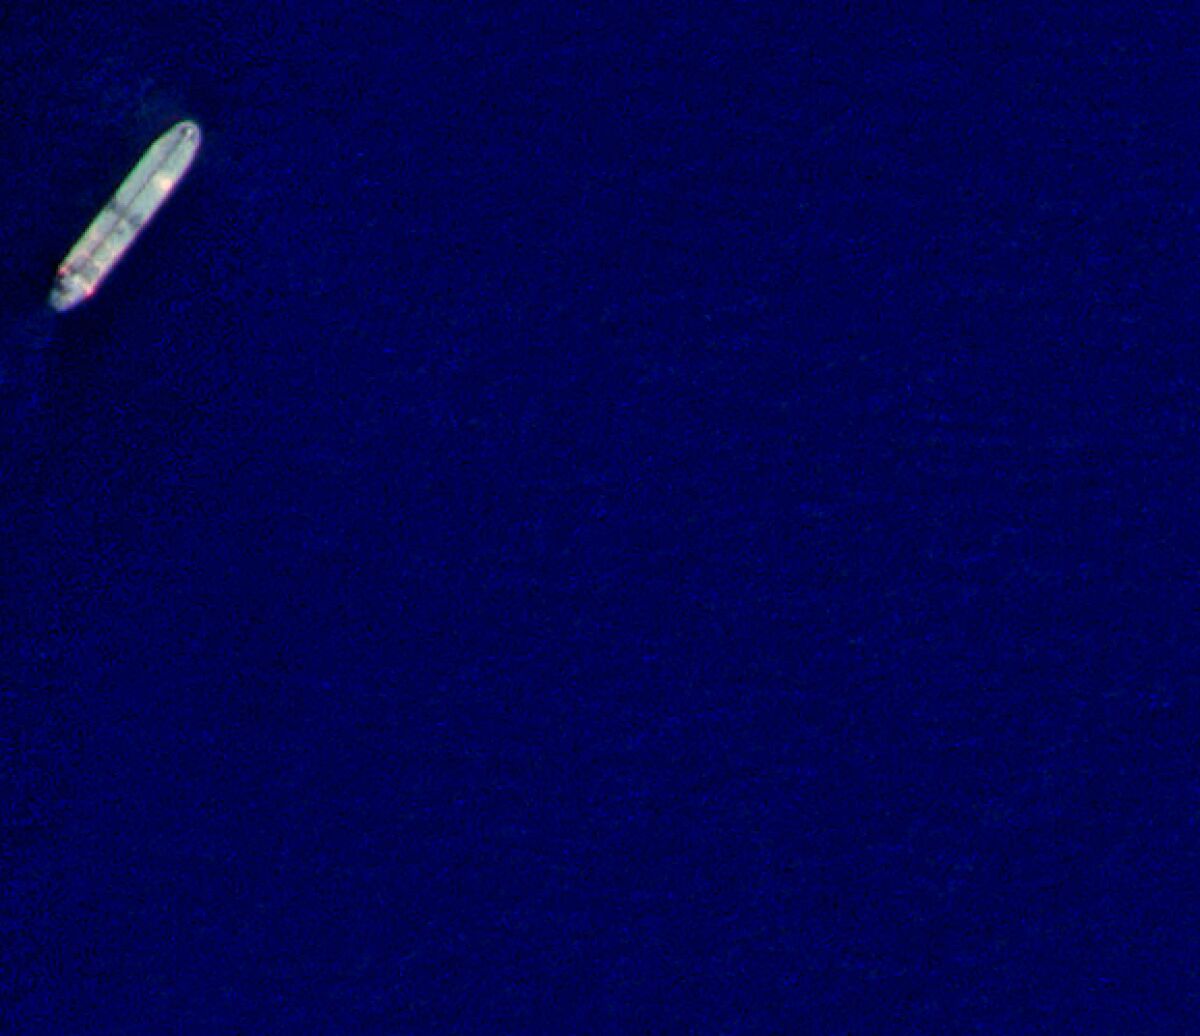 In this satellite photo from Planet Labs PBC, the Iranian oil tanker Starla is seen off the coast of Barcelona, Venezuela, Sunday, Jan. 30, 2022. An Iran-flagged supertanker carrying more than 2 million barrels of condensate has docked at a Venezuelan port, with both countries facing U.S. sanctions, according to analysts and satellite images analyzed by The Associated Press. (Planet Labs PBC via AP)